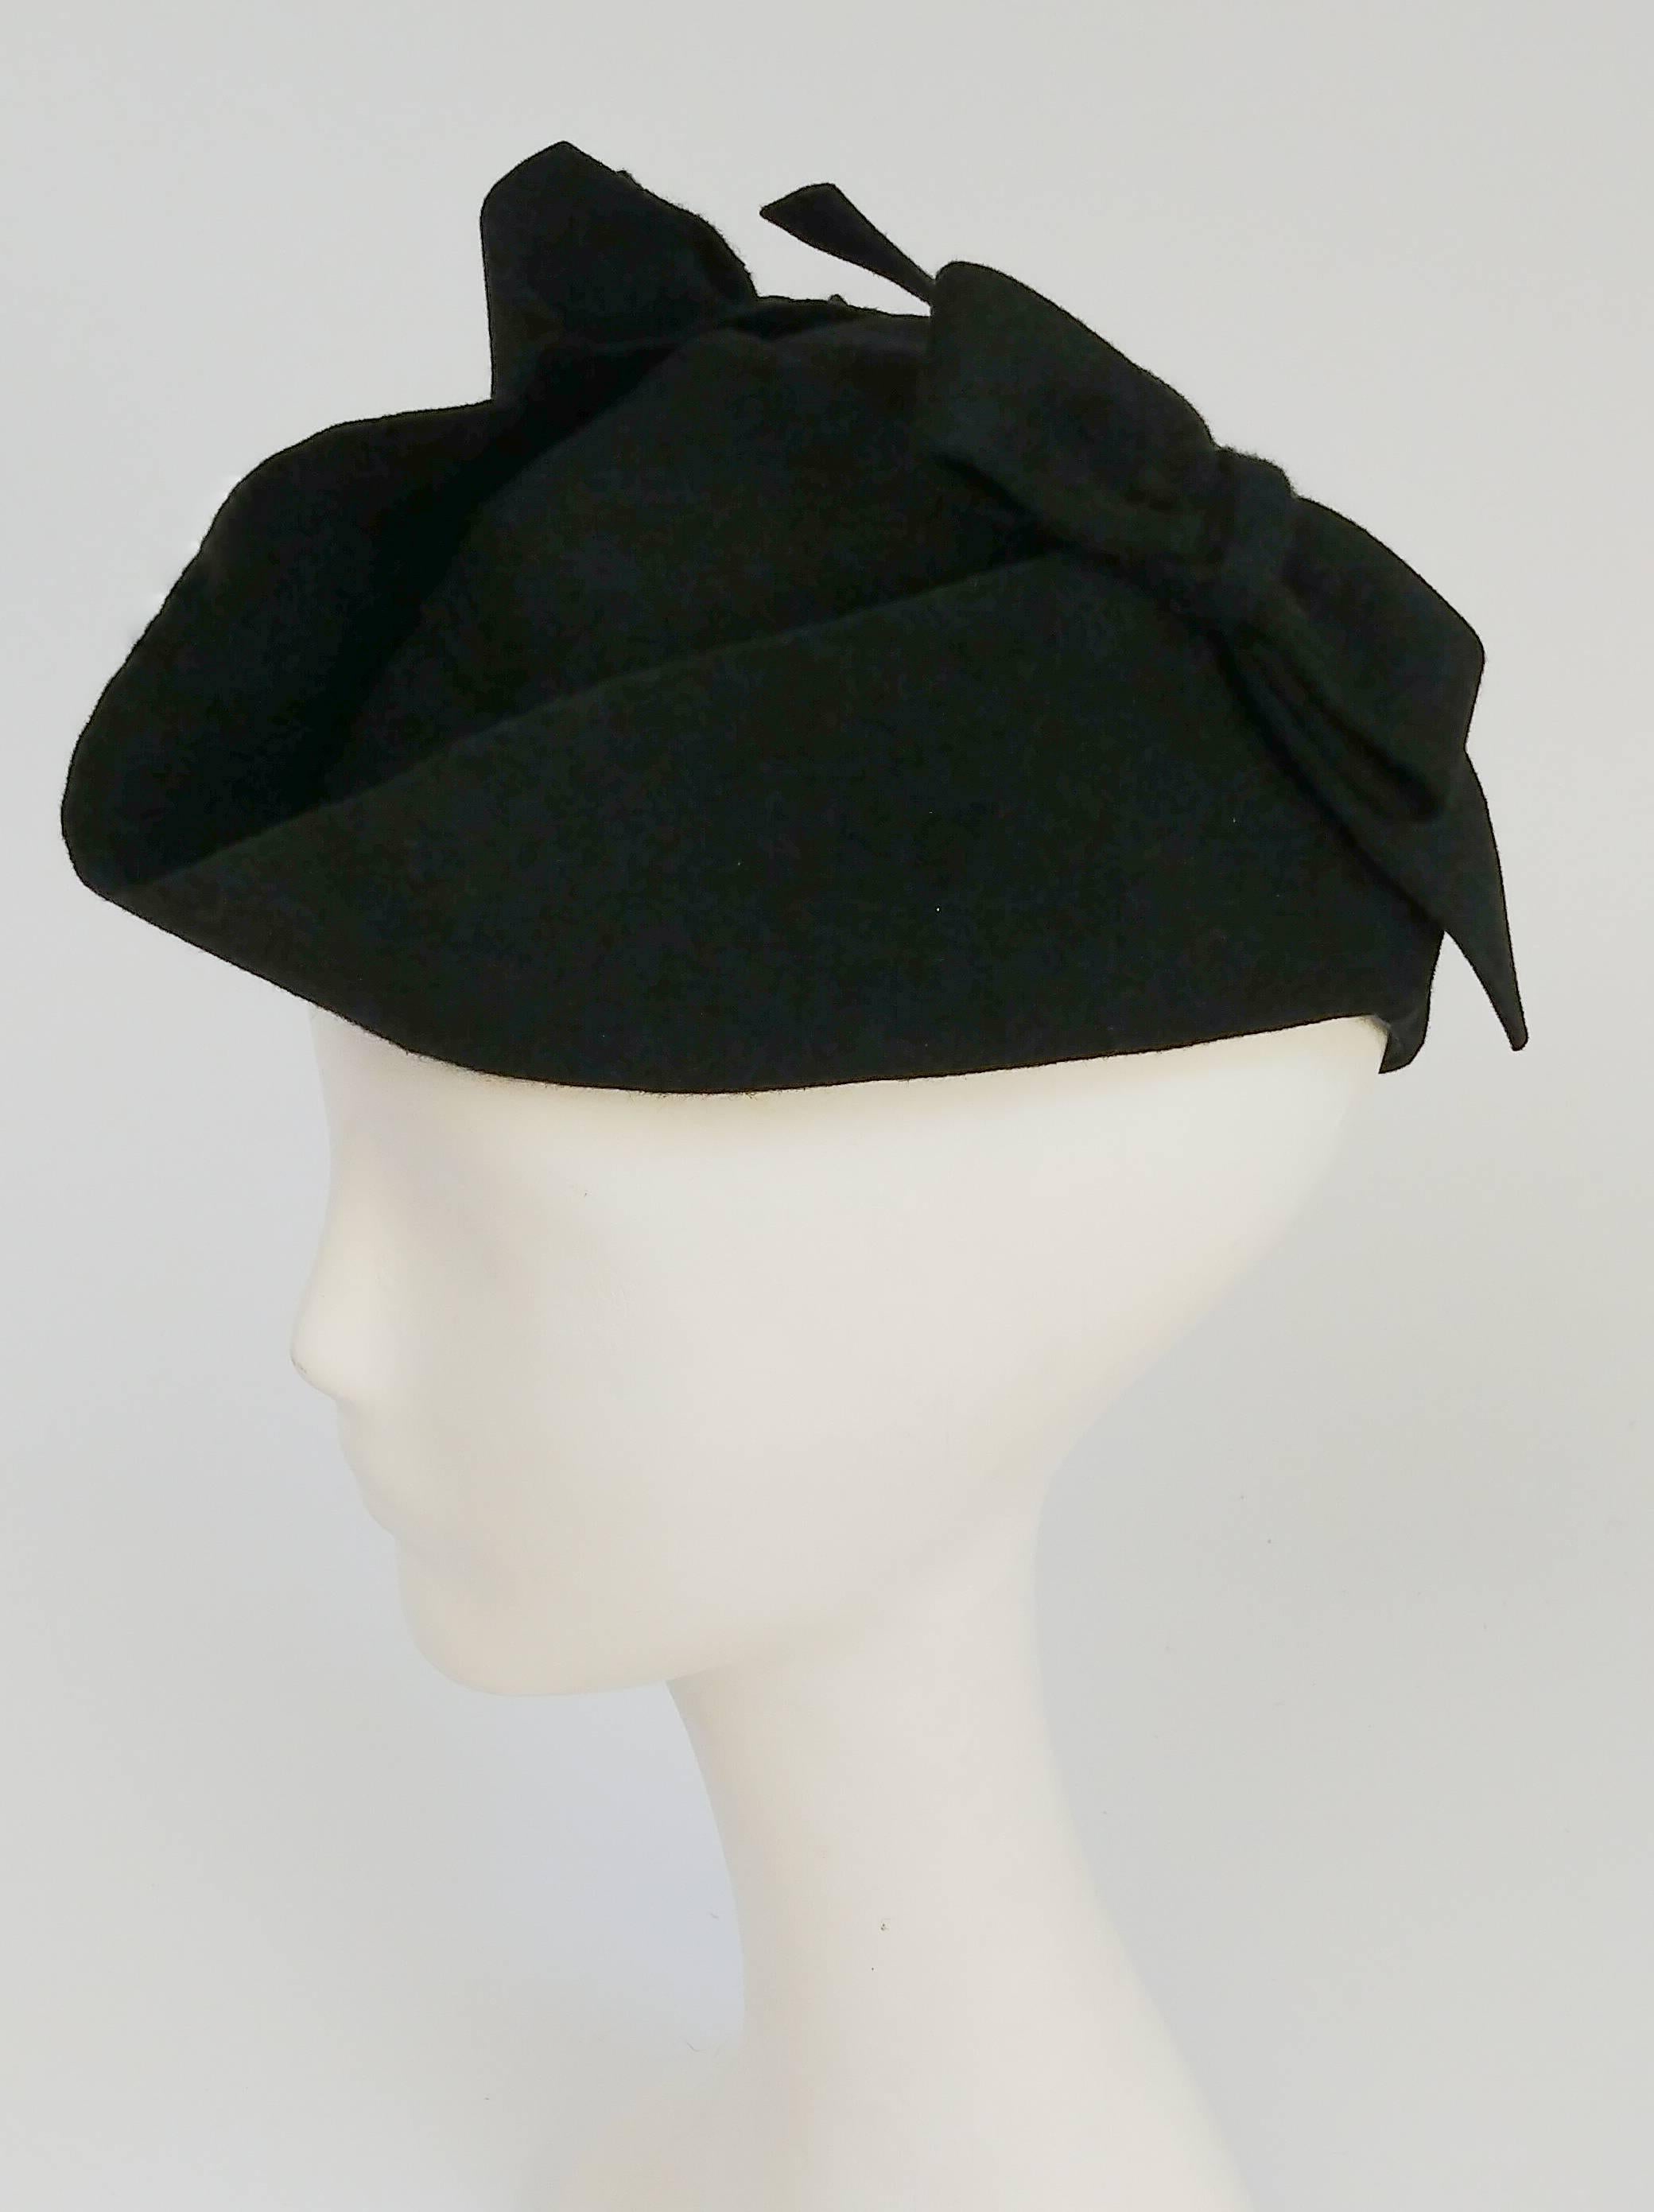 1940s Felt Mini Tricorn w/ Bows. Elastic holds hat to head, wear tilted forward for true 40s flair. 